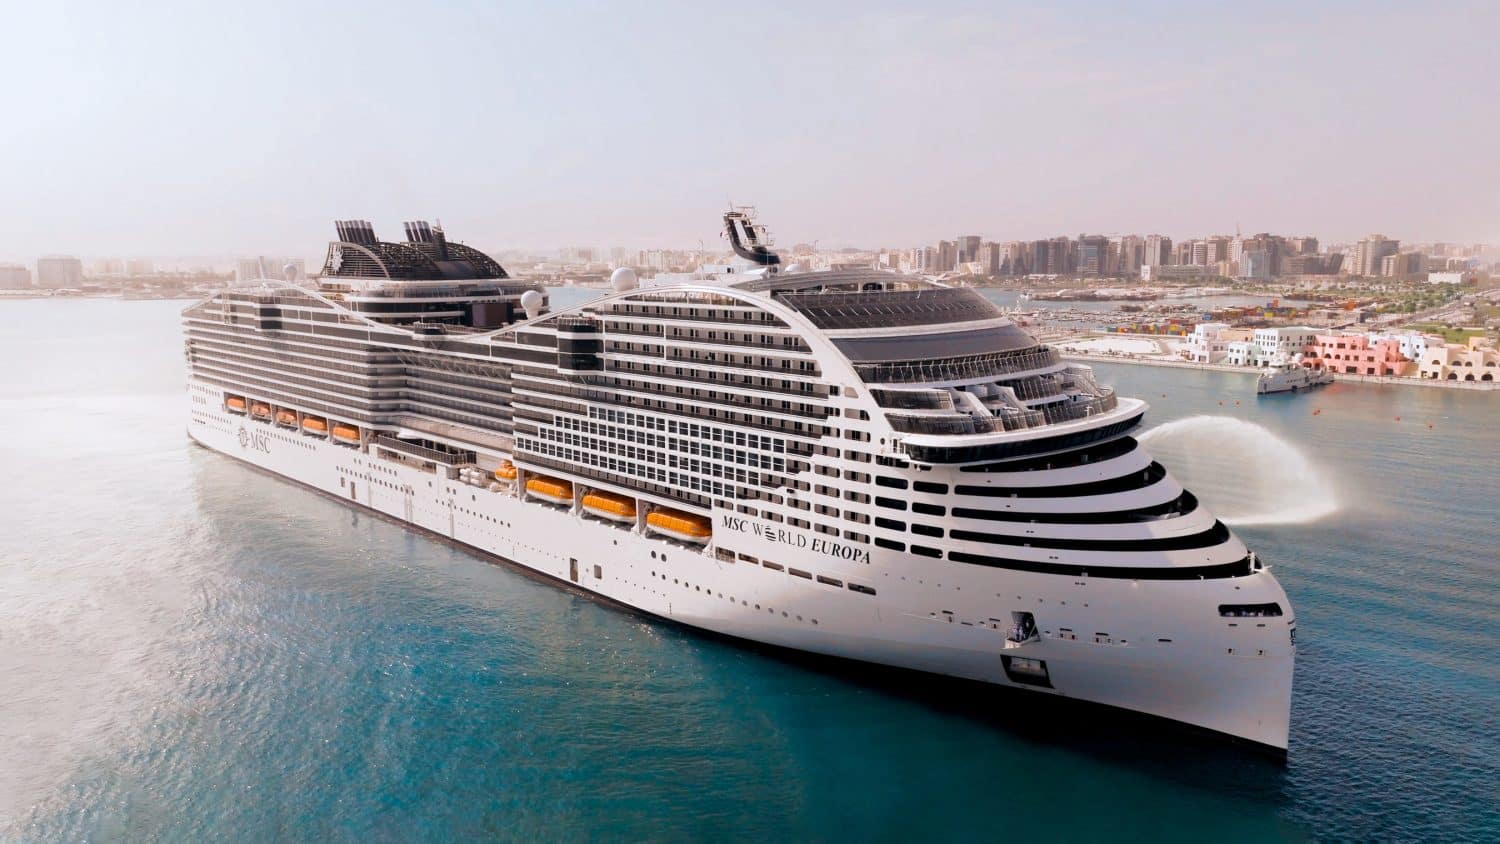 msc biggest cruise ship in the world